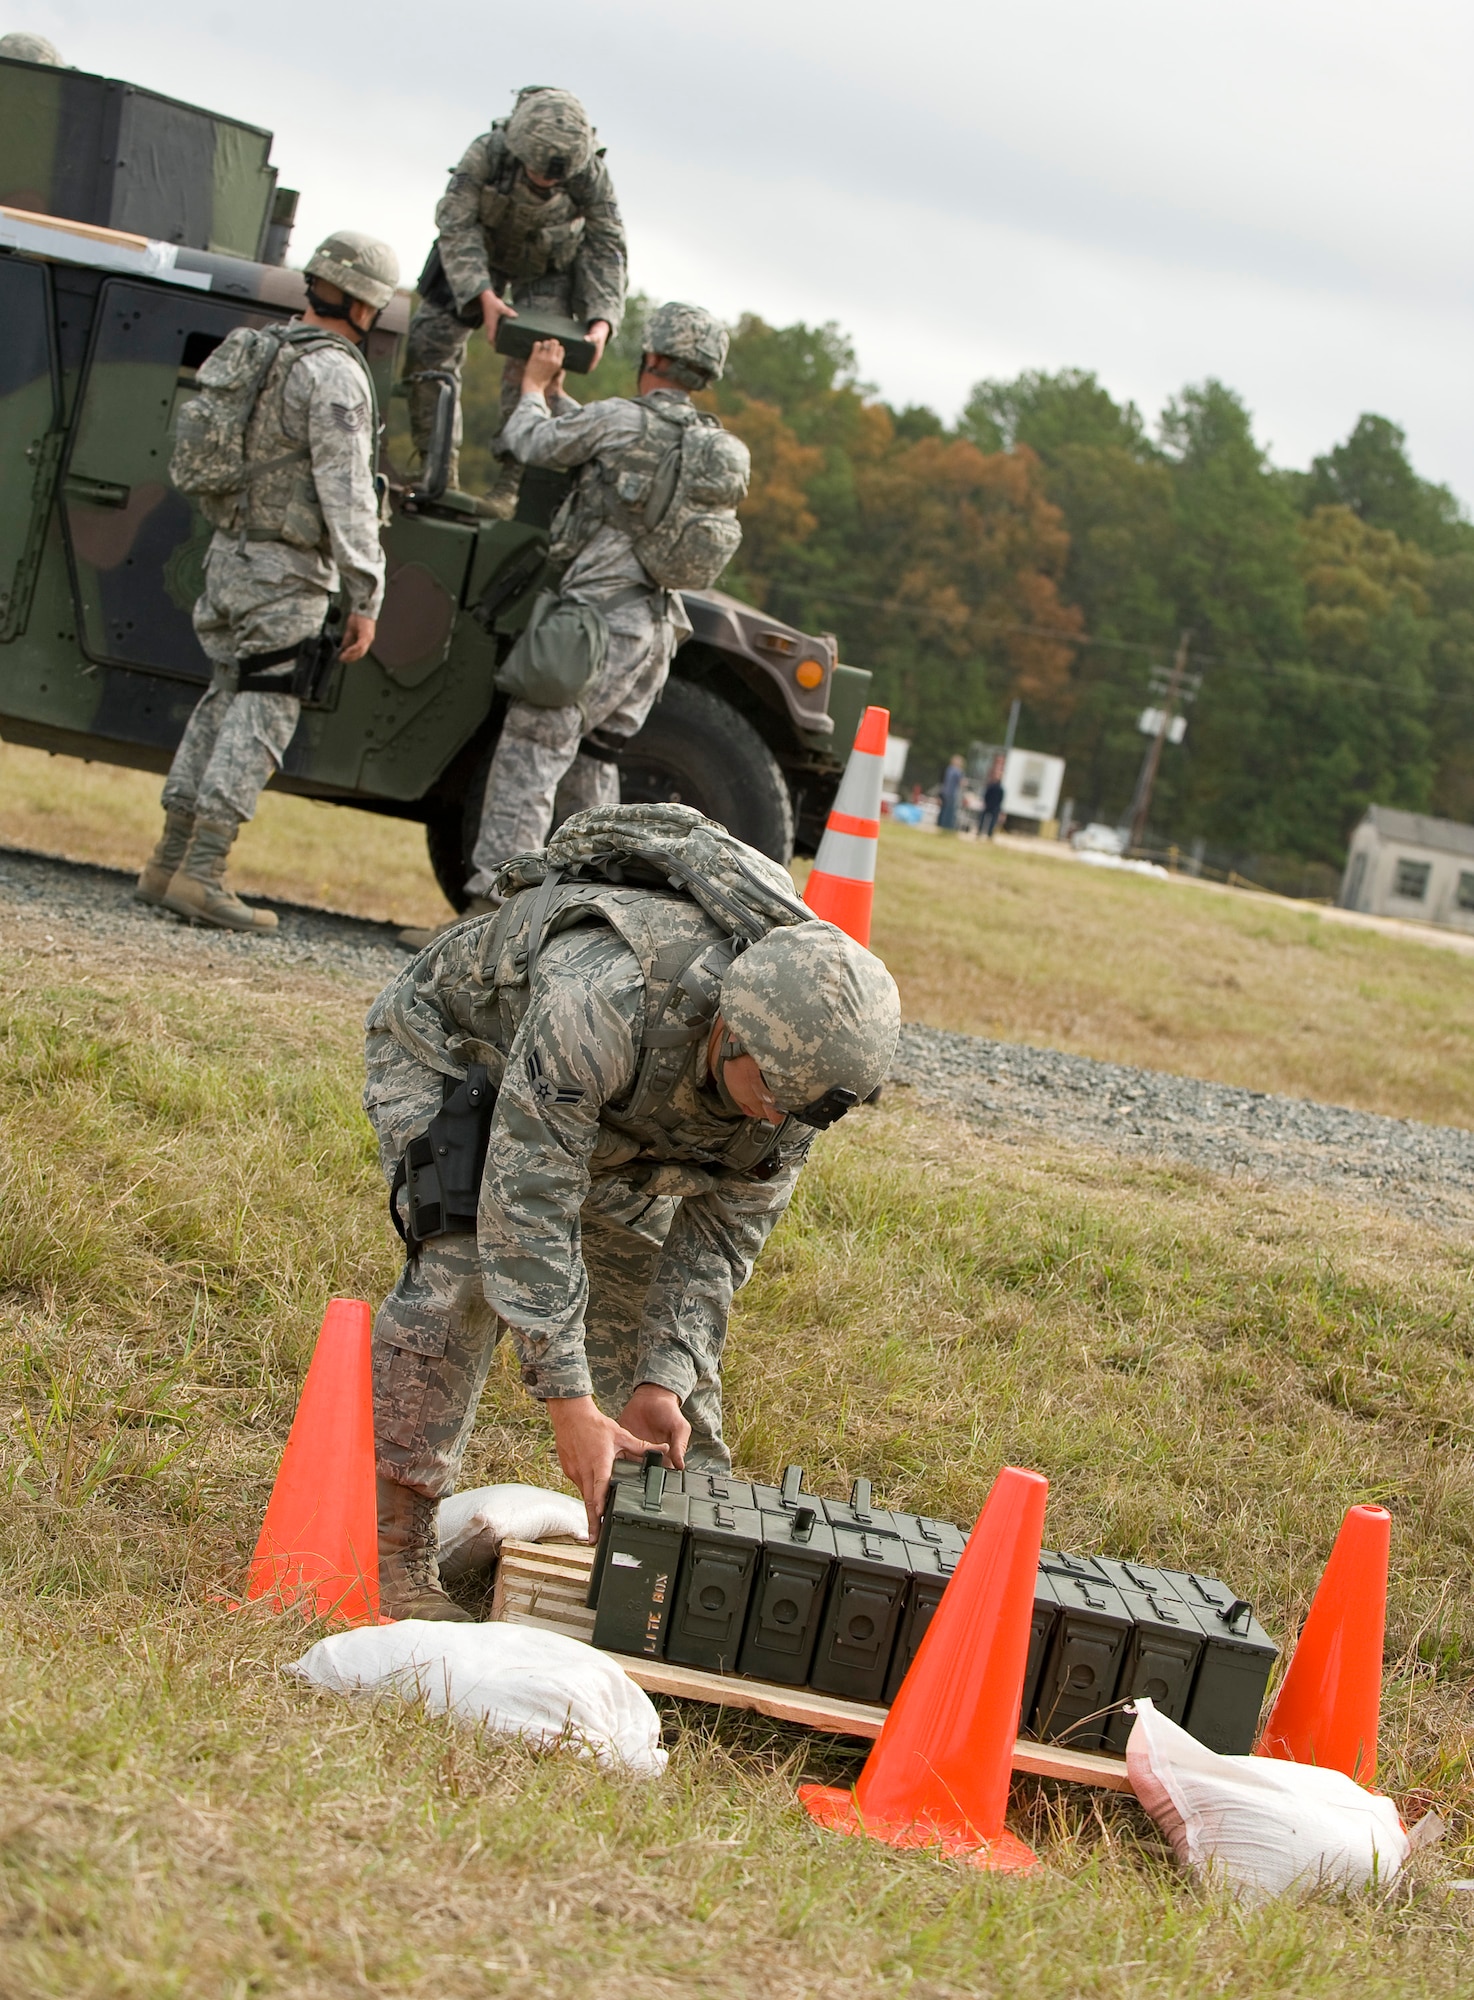 Members of the 7th Security Forces Squadron move ammo cans during the mental and physical challenge portion of the 2011 Air Force Global Strike Challenge on Camp Minden, La., Nov. 7. This was one of several events each security forces team had to complete during the MAP challenge. (U.S. Air Force photo/Senior Airman Chad Warren)(RELEASED)